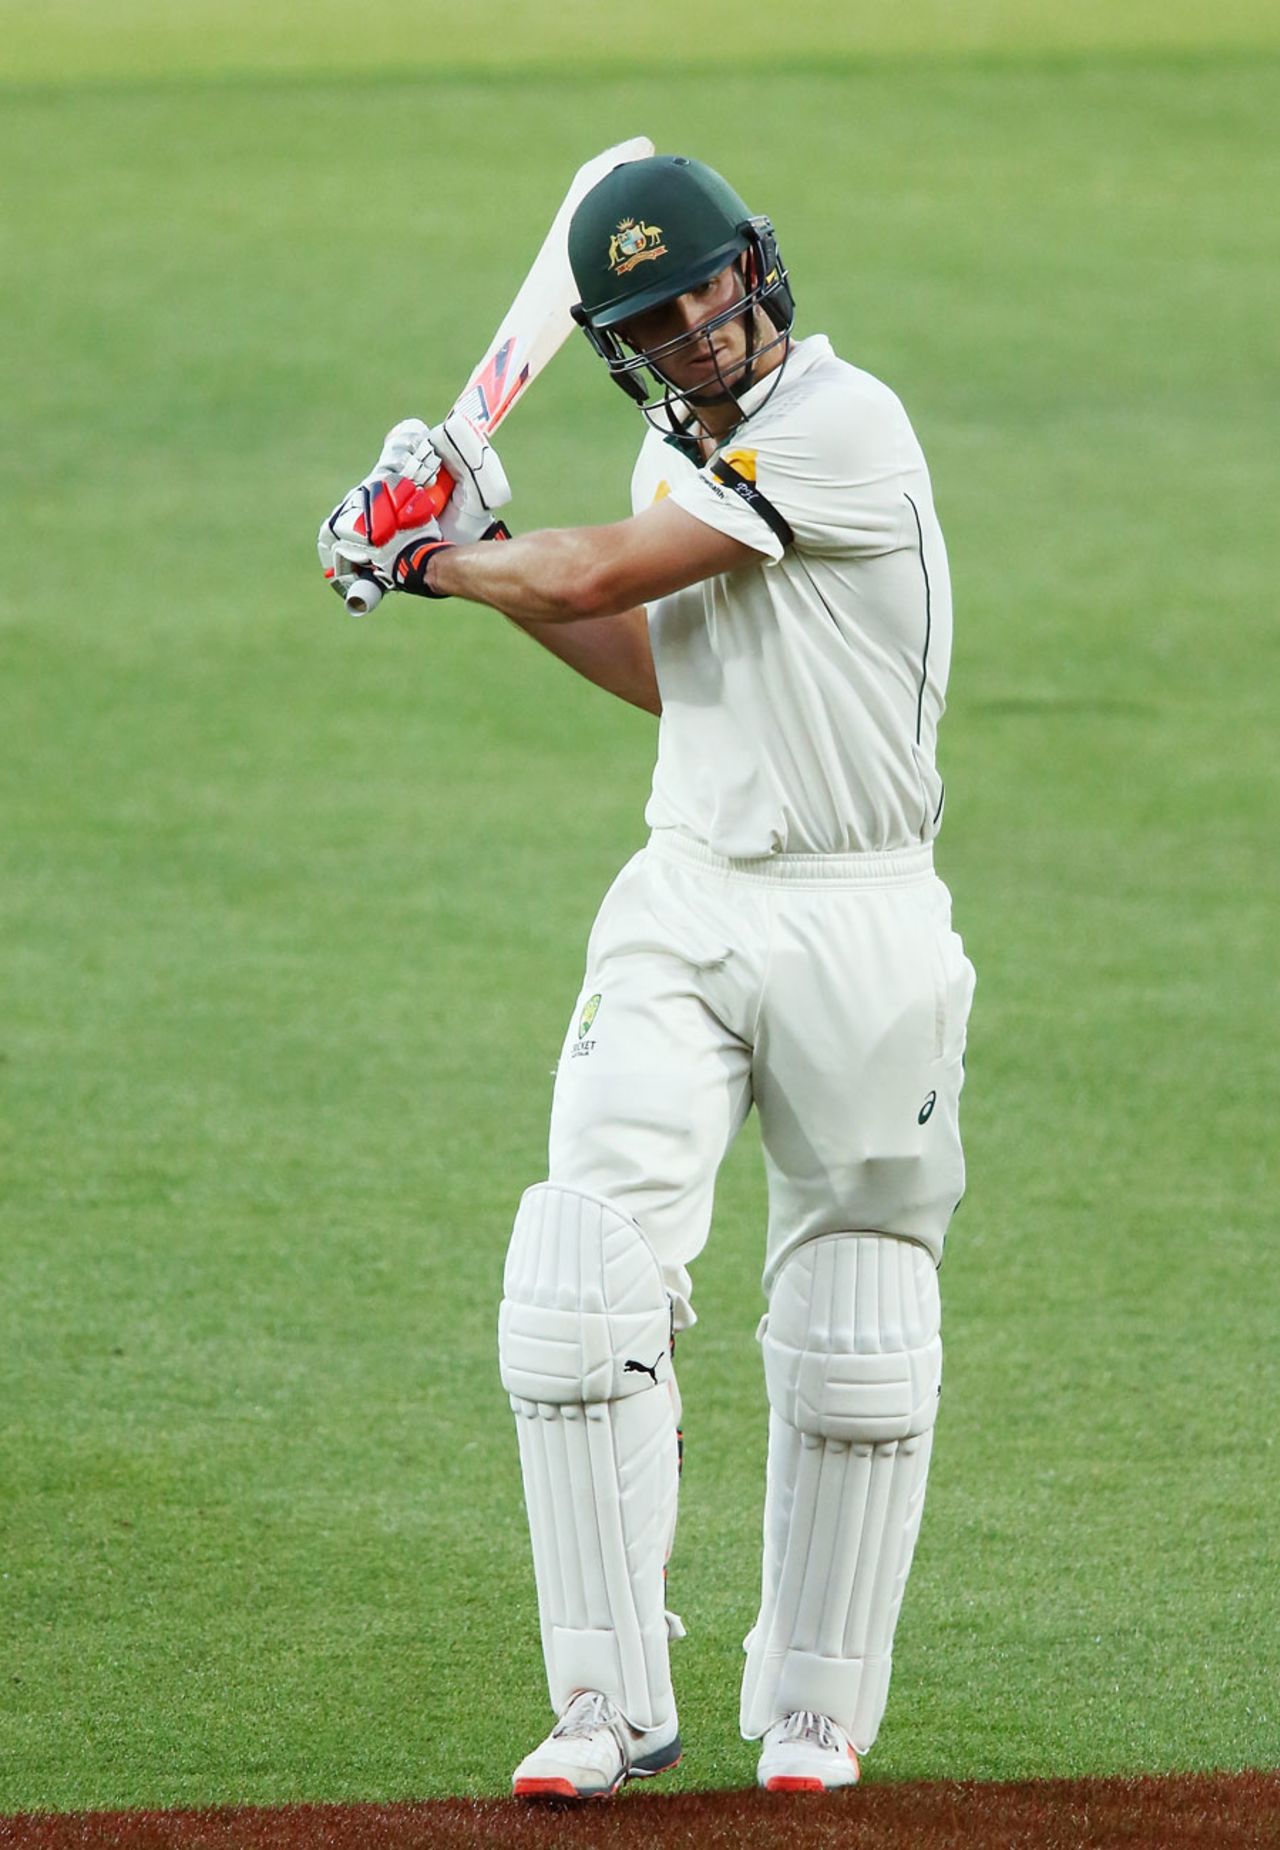 Mitchell Marsh rehearses the shot that resulted in his dismissal, Australia v New Zealand, 3rd Test, Adelaide, 3rd day, November 29, 2015